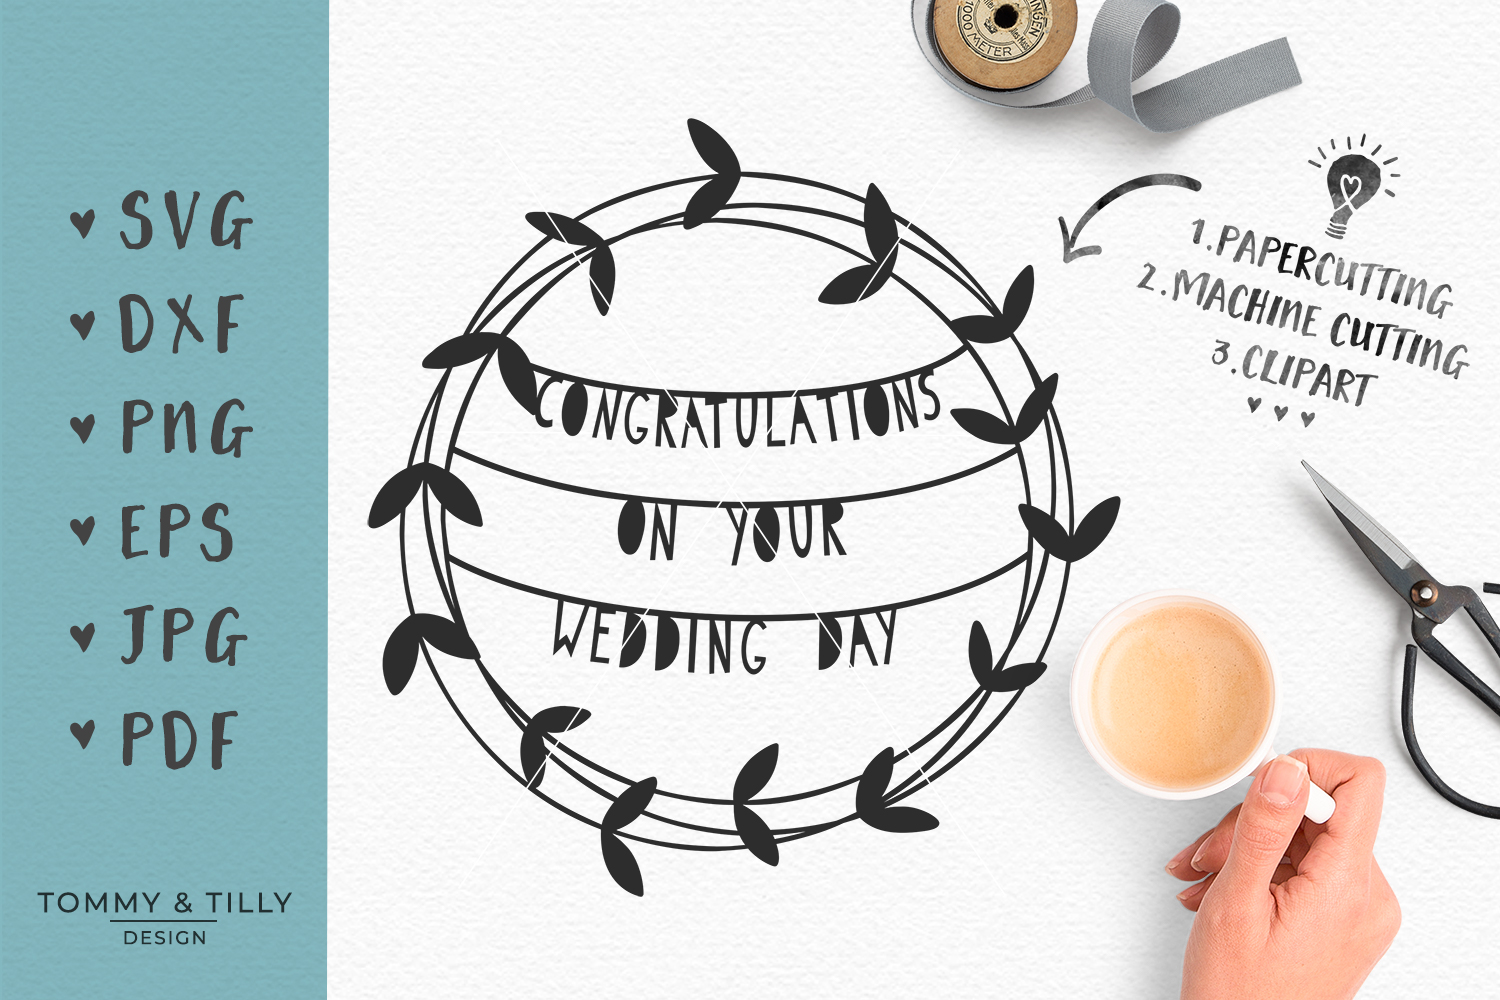 Download Congratulations on your wedding day- SVG DXF PNG EPS JPG PDF